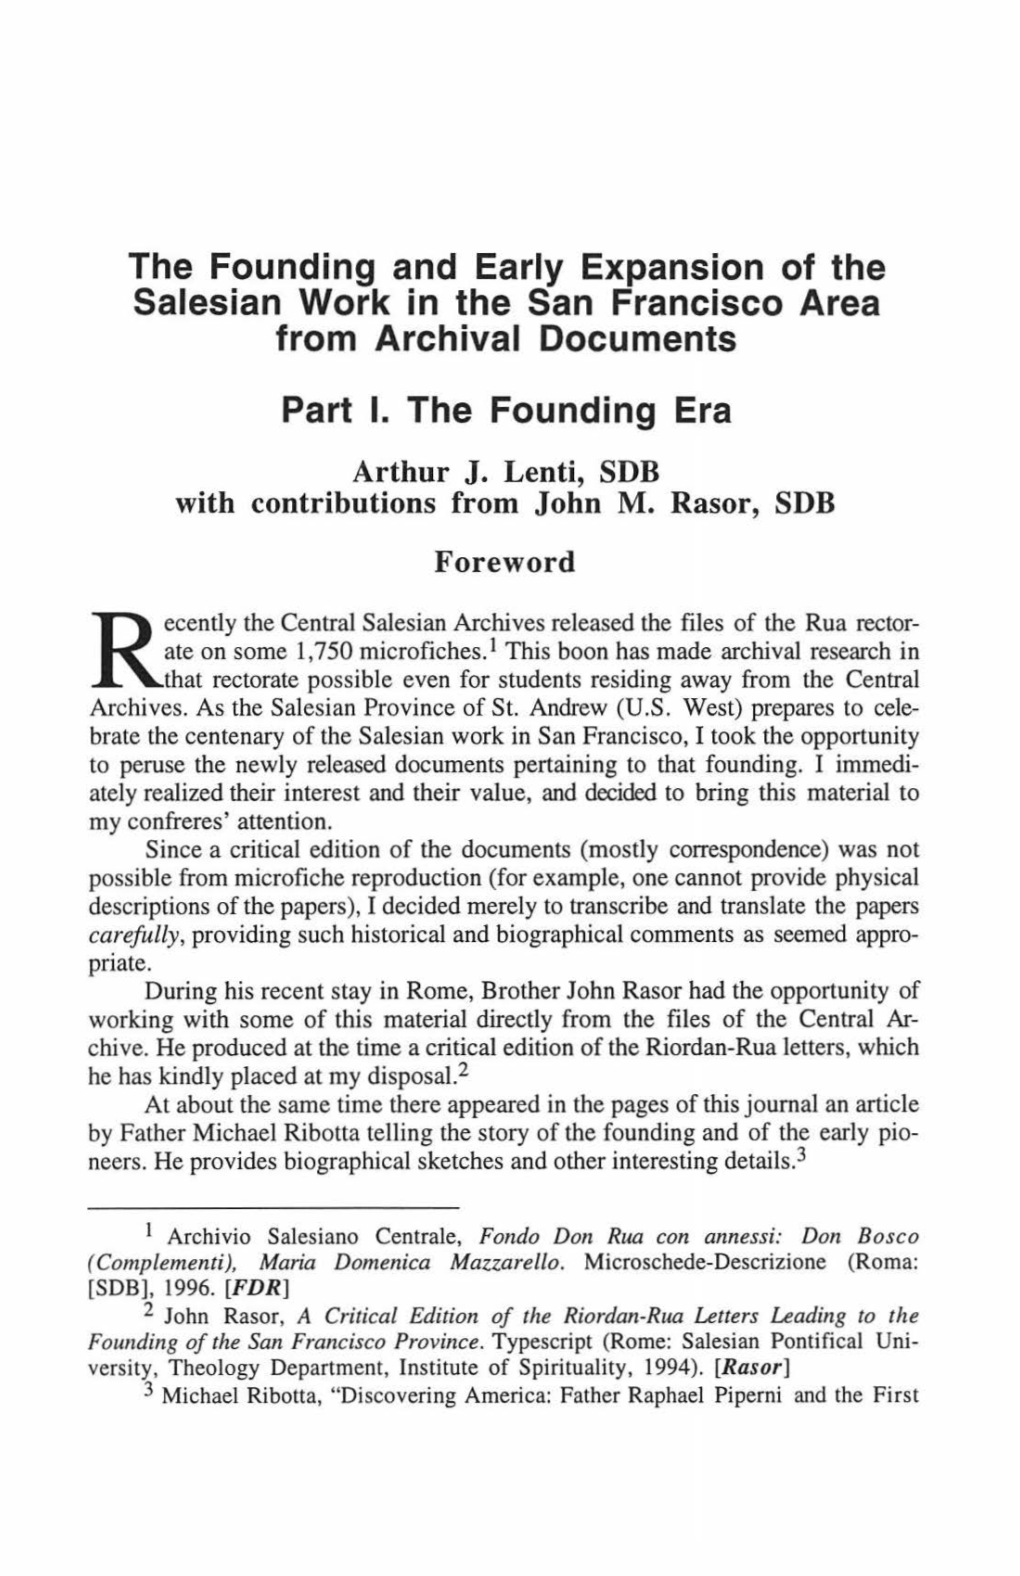 The Founding and Early Expansion of the Salesian Work in the San Francisco Area from Archival Documents Part I